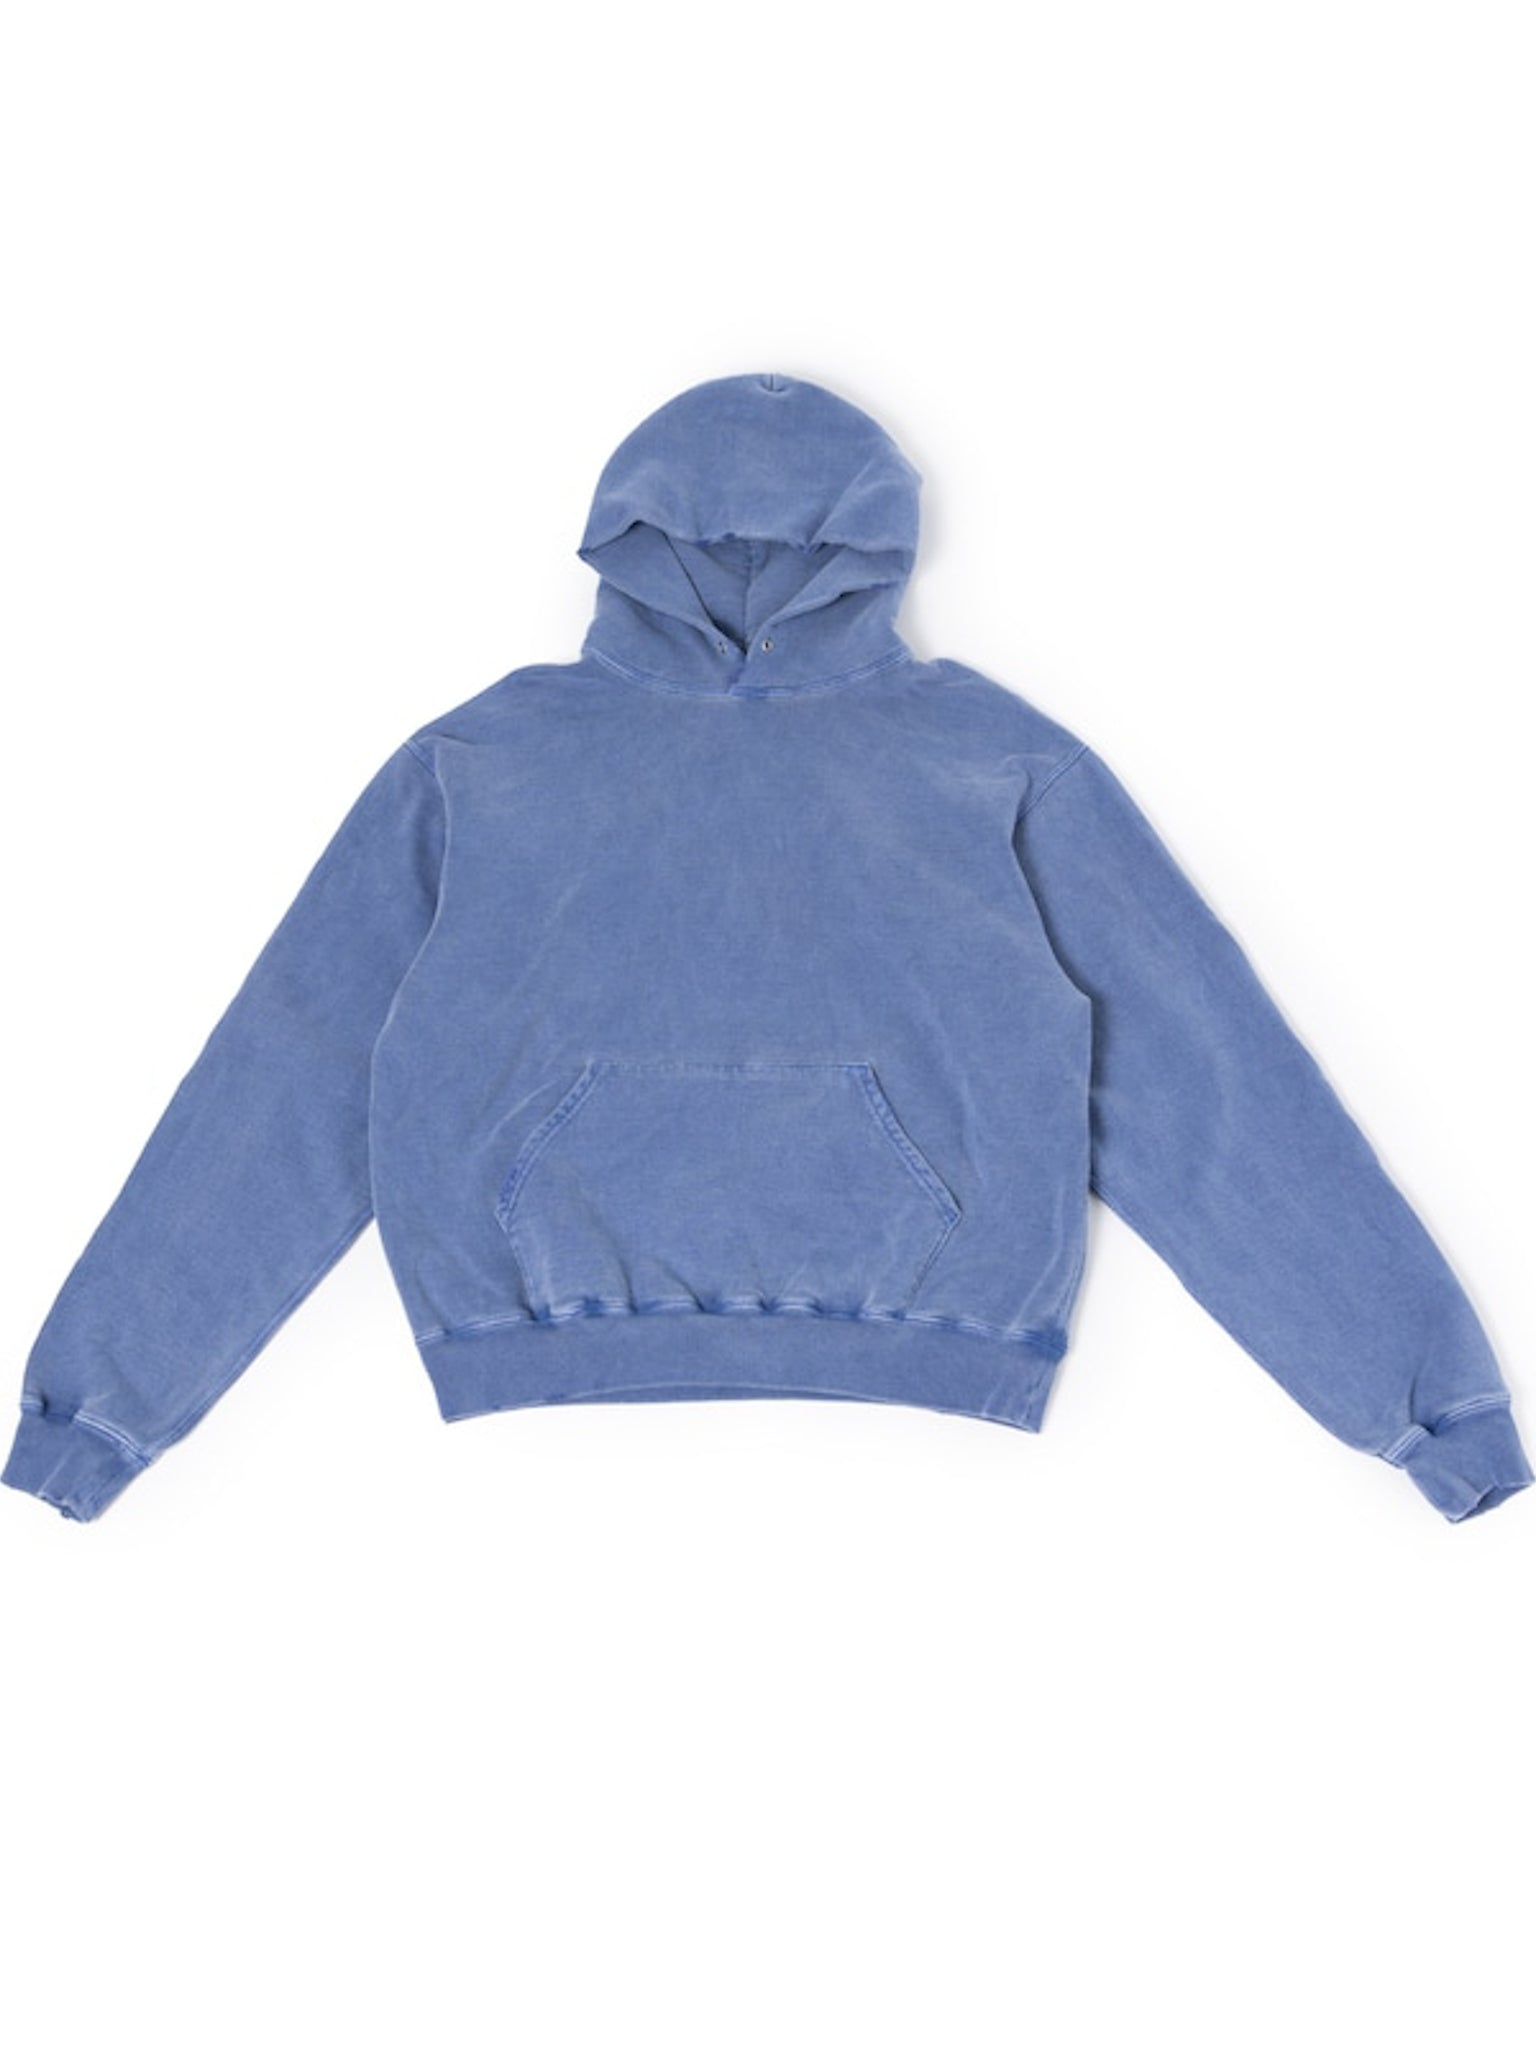 SimplyComplicated "CORE HOODIE"